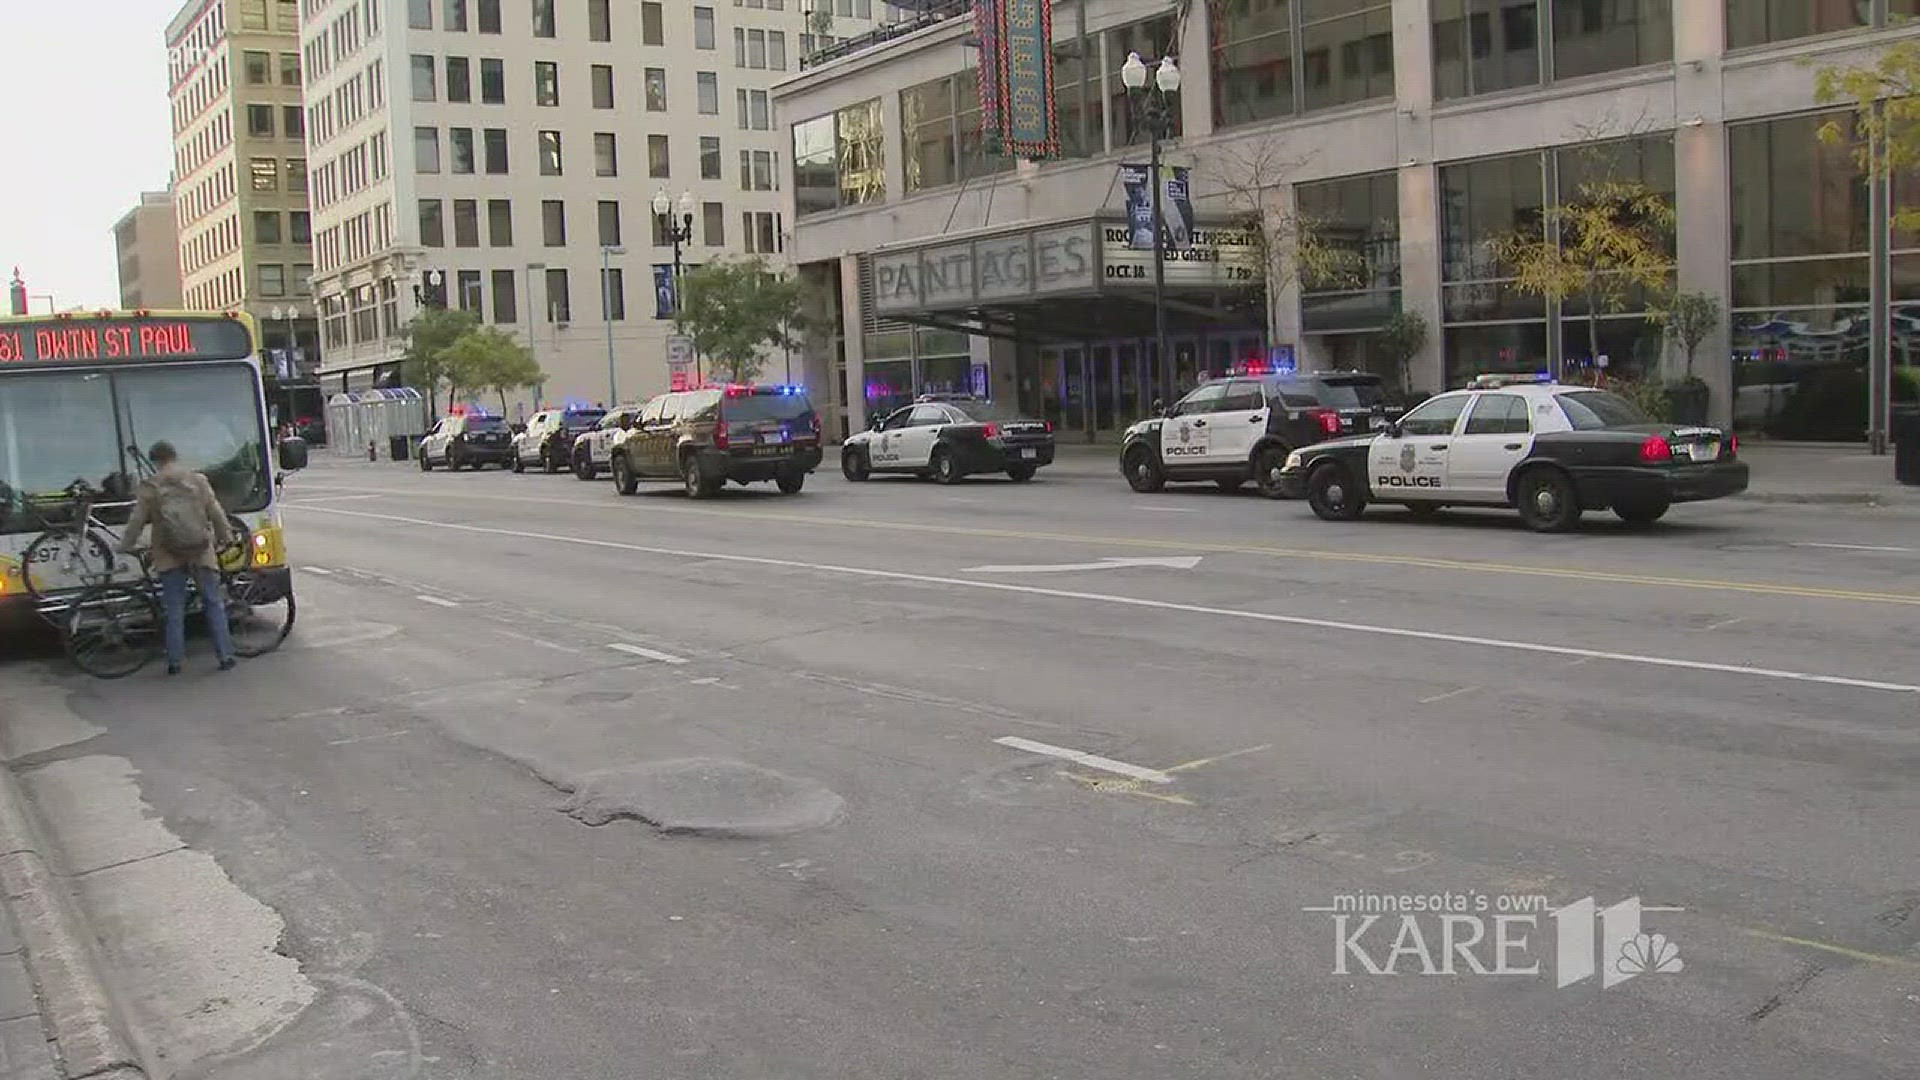 Minneapolis police are investigating a shooting that happened downtown during the busy rush hour Wednesday afternoon. Police say a man with a conceal and carry permit shot another man in the leg after he felt threatened.